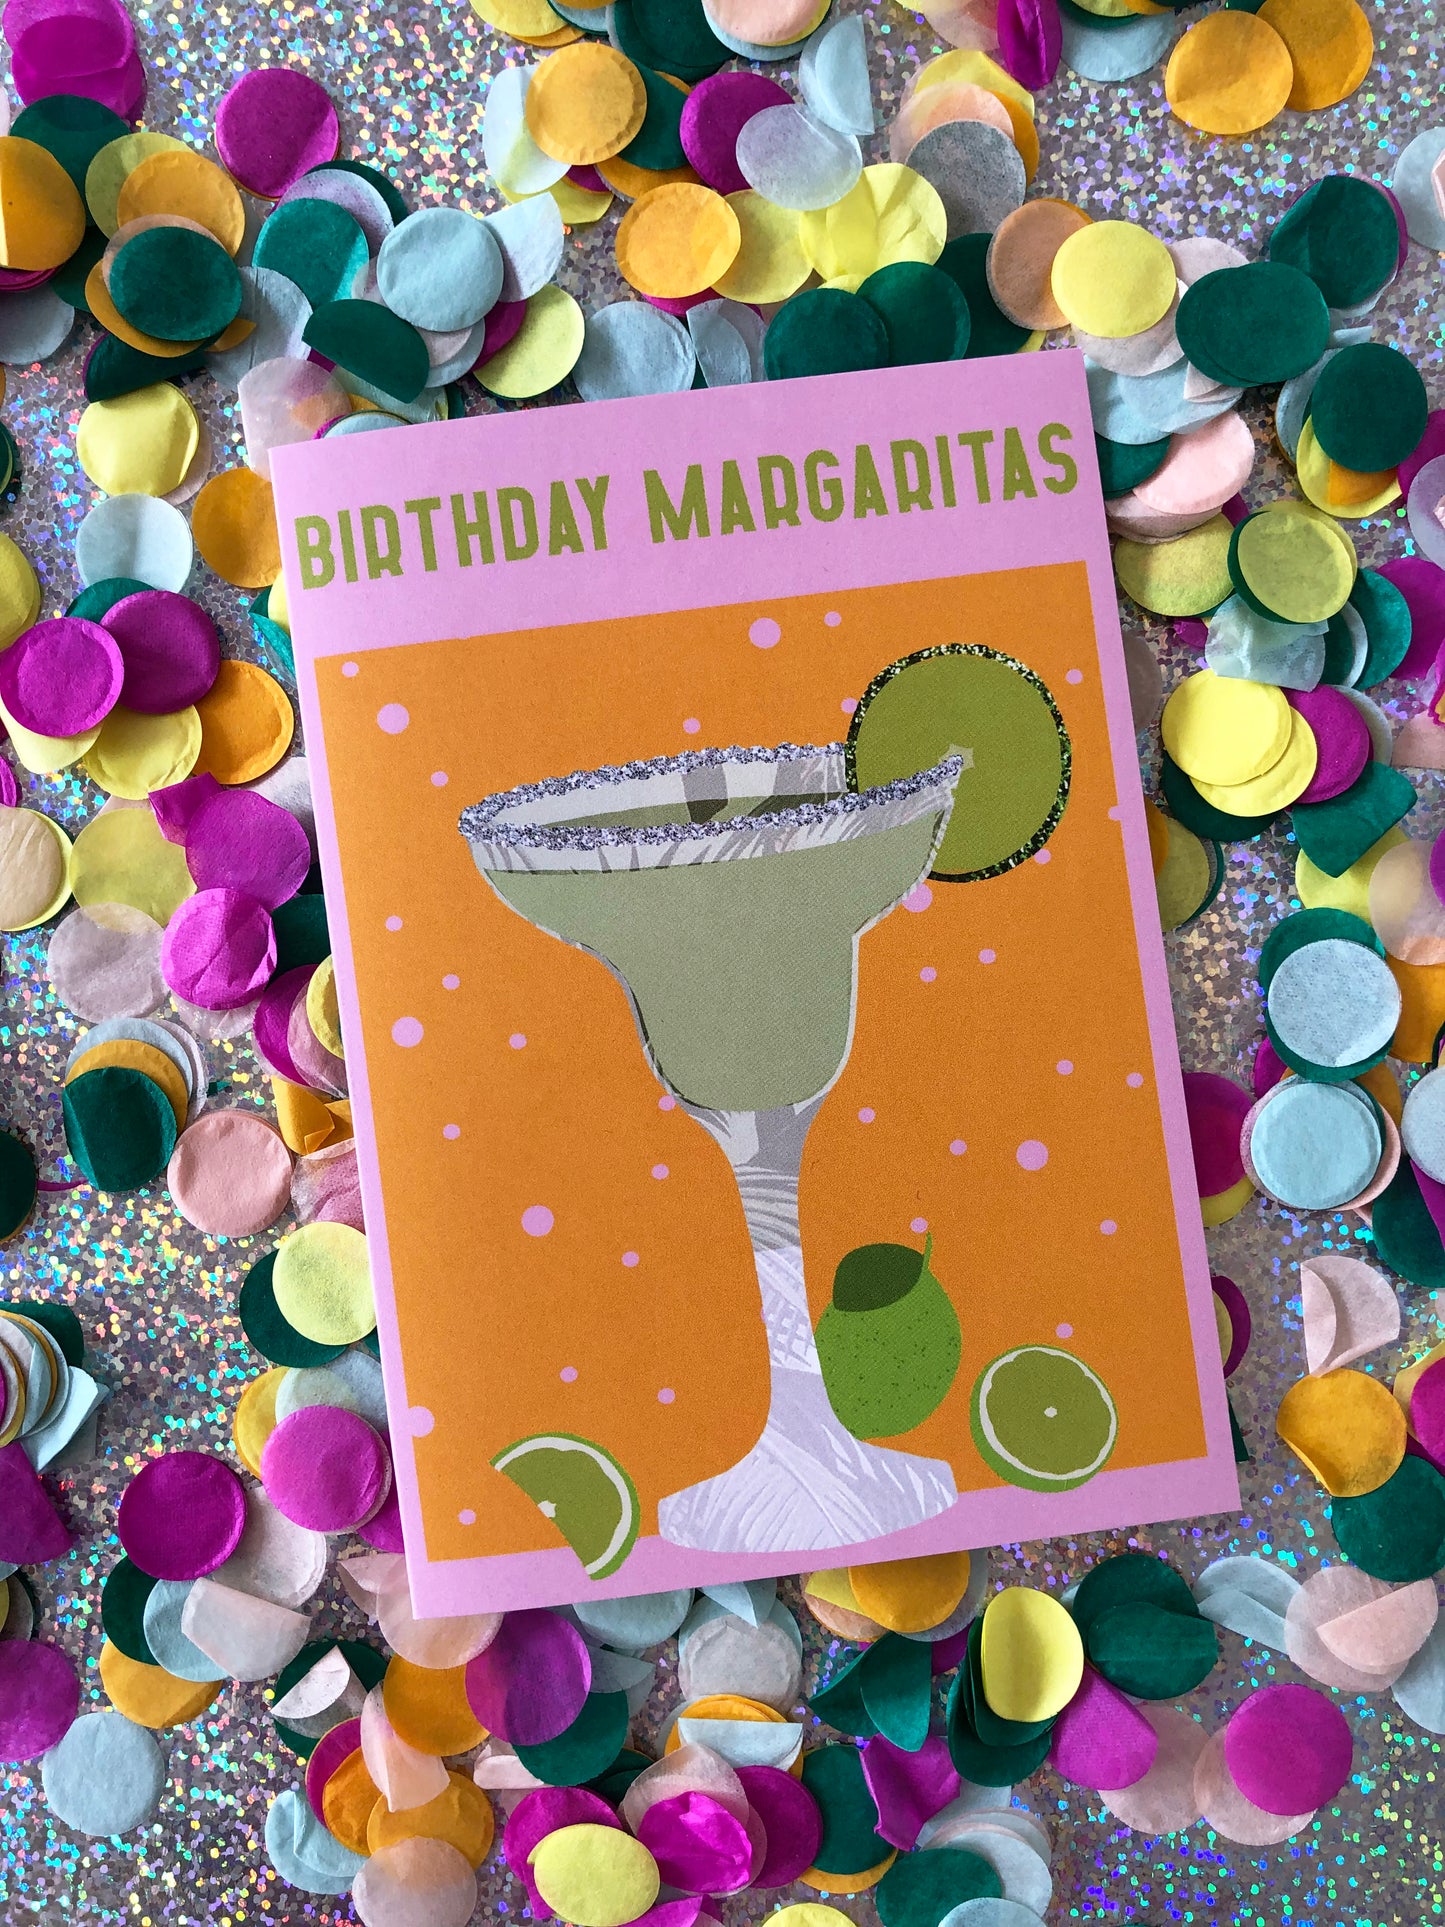 Bright and colourful birthday card featuring a margarita cocktail on a confetti background.